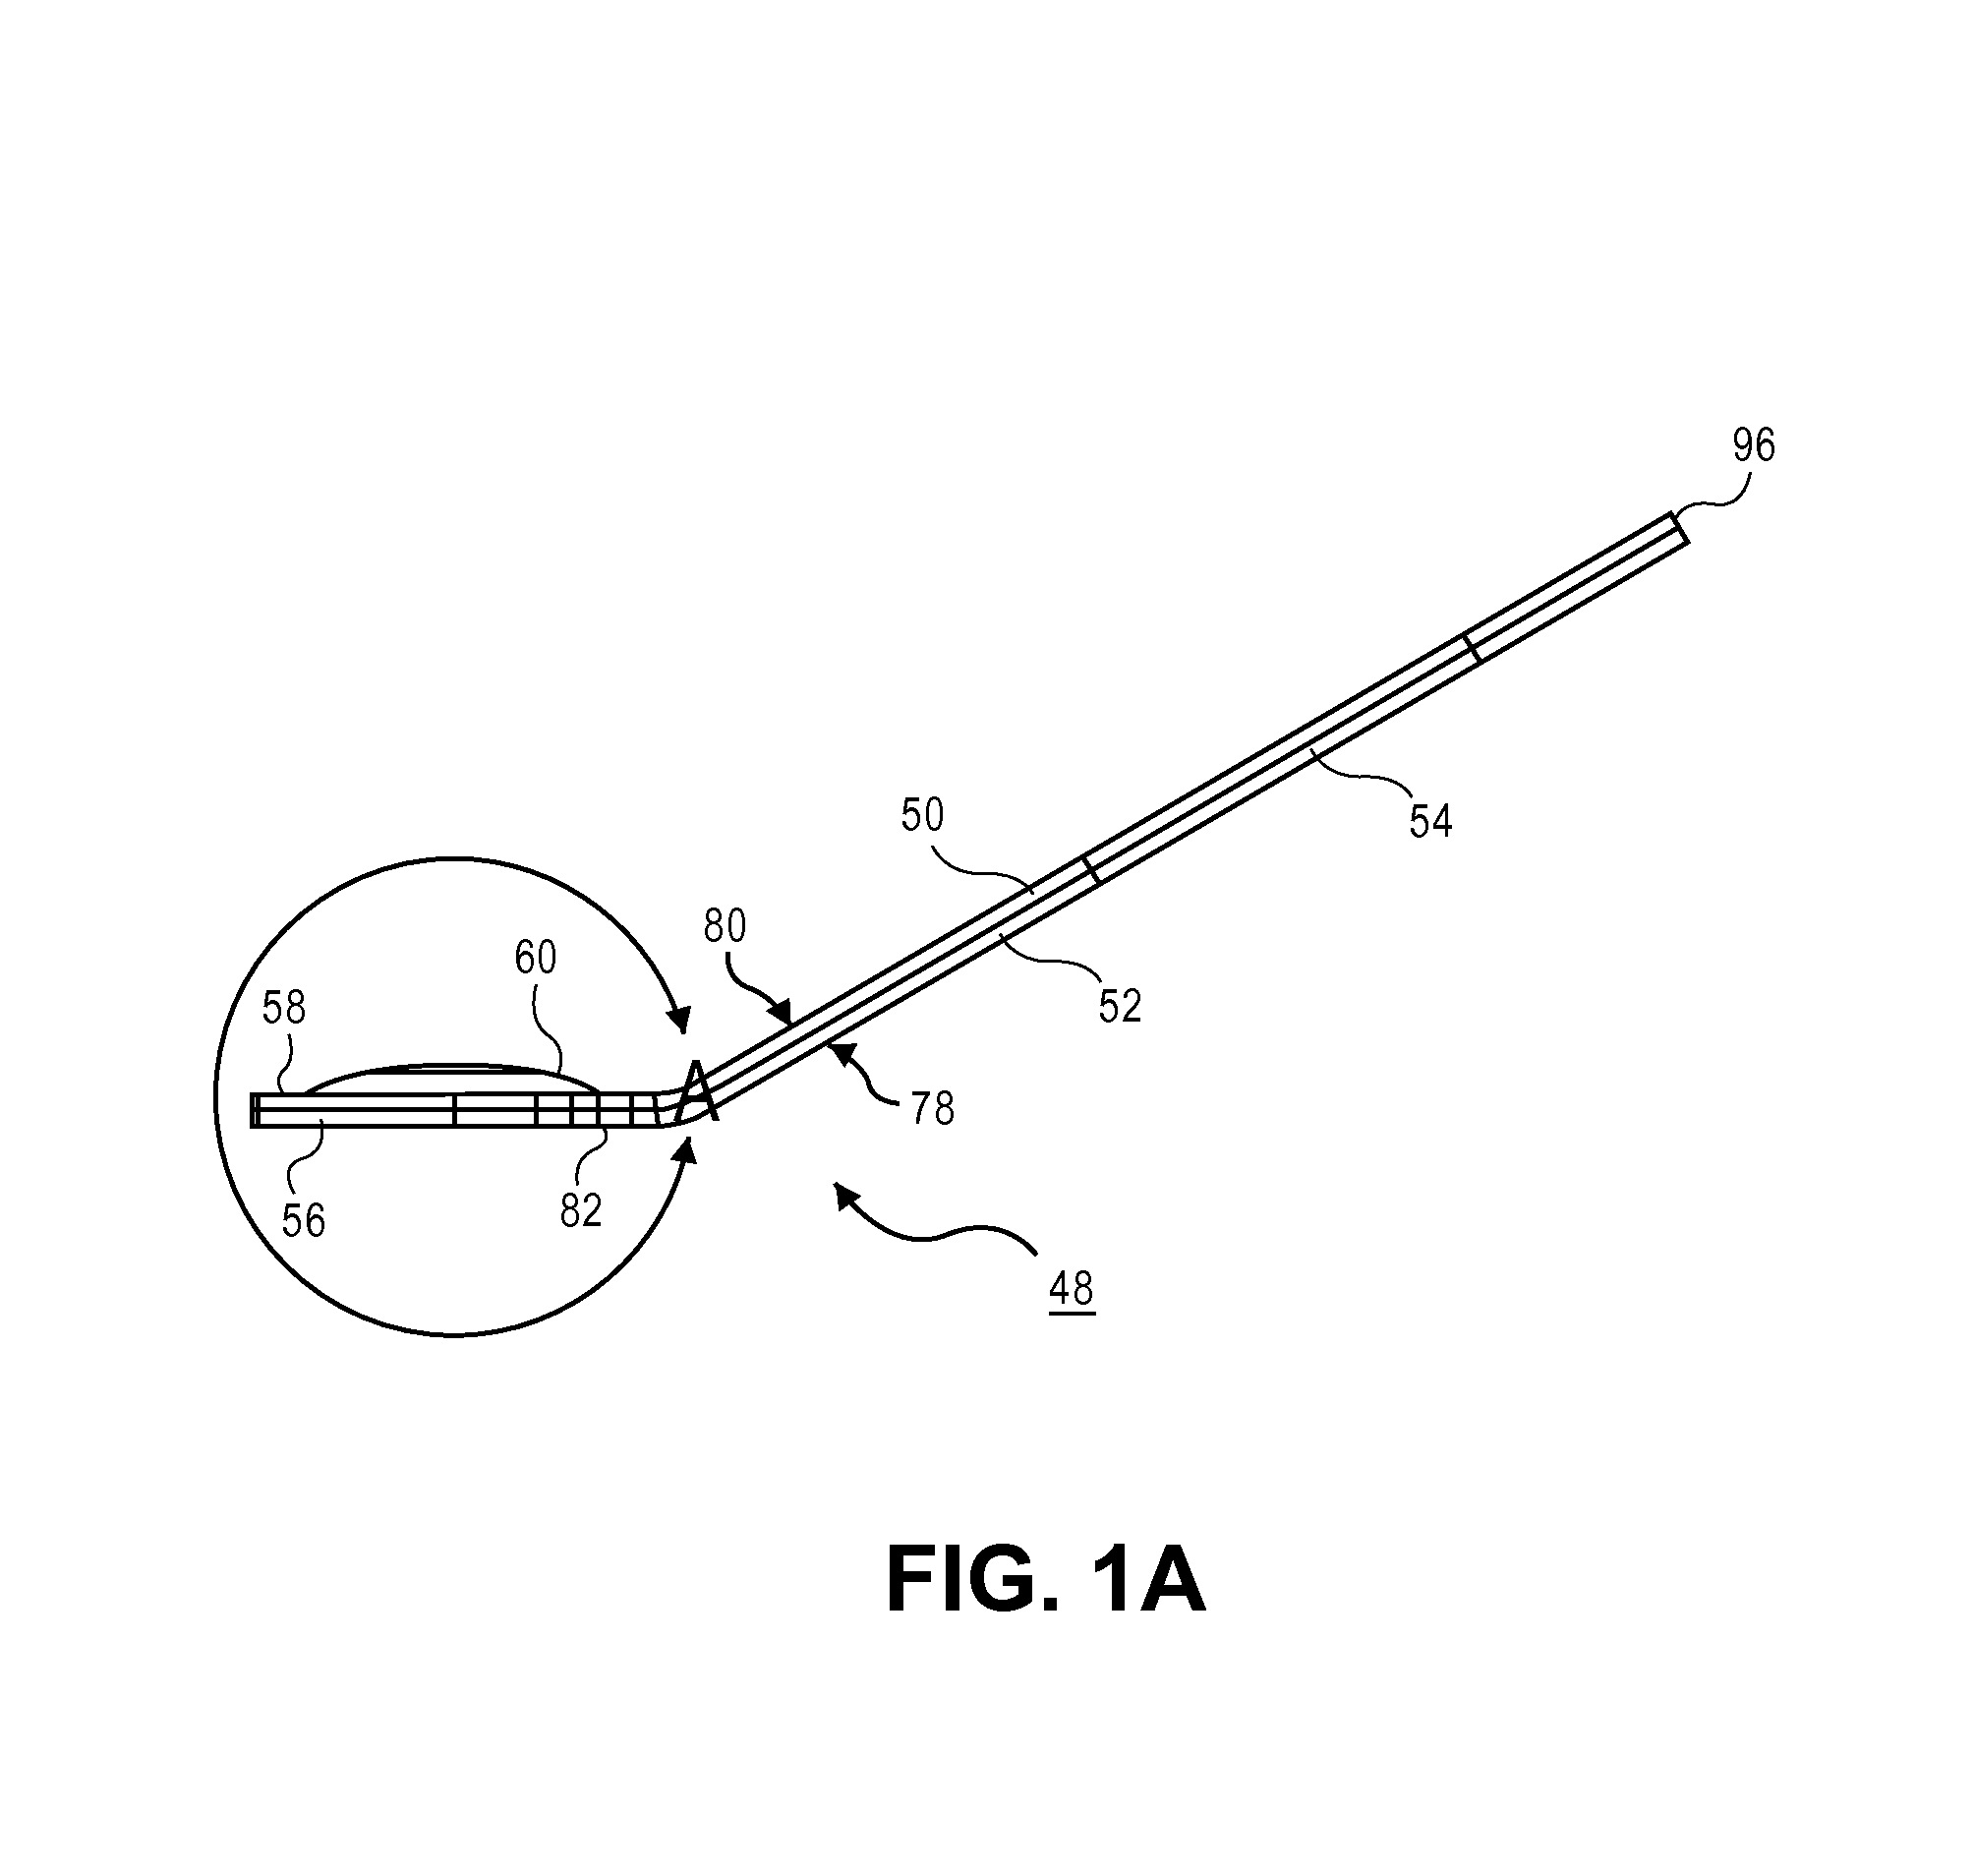 Corneal implant storage and delivery devices